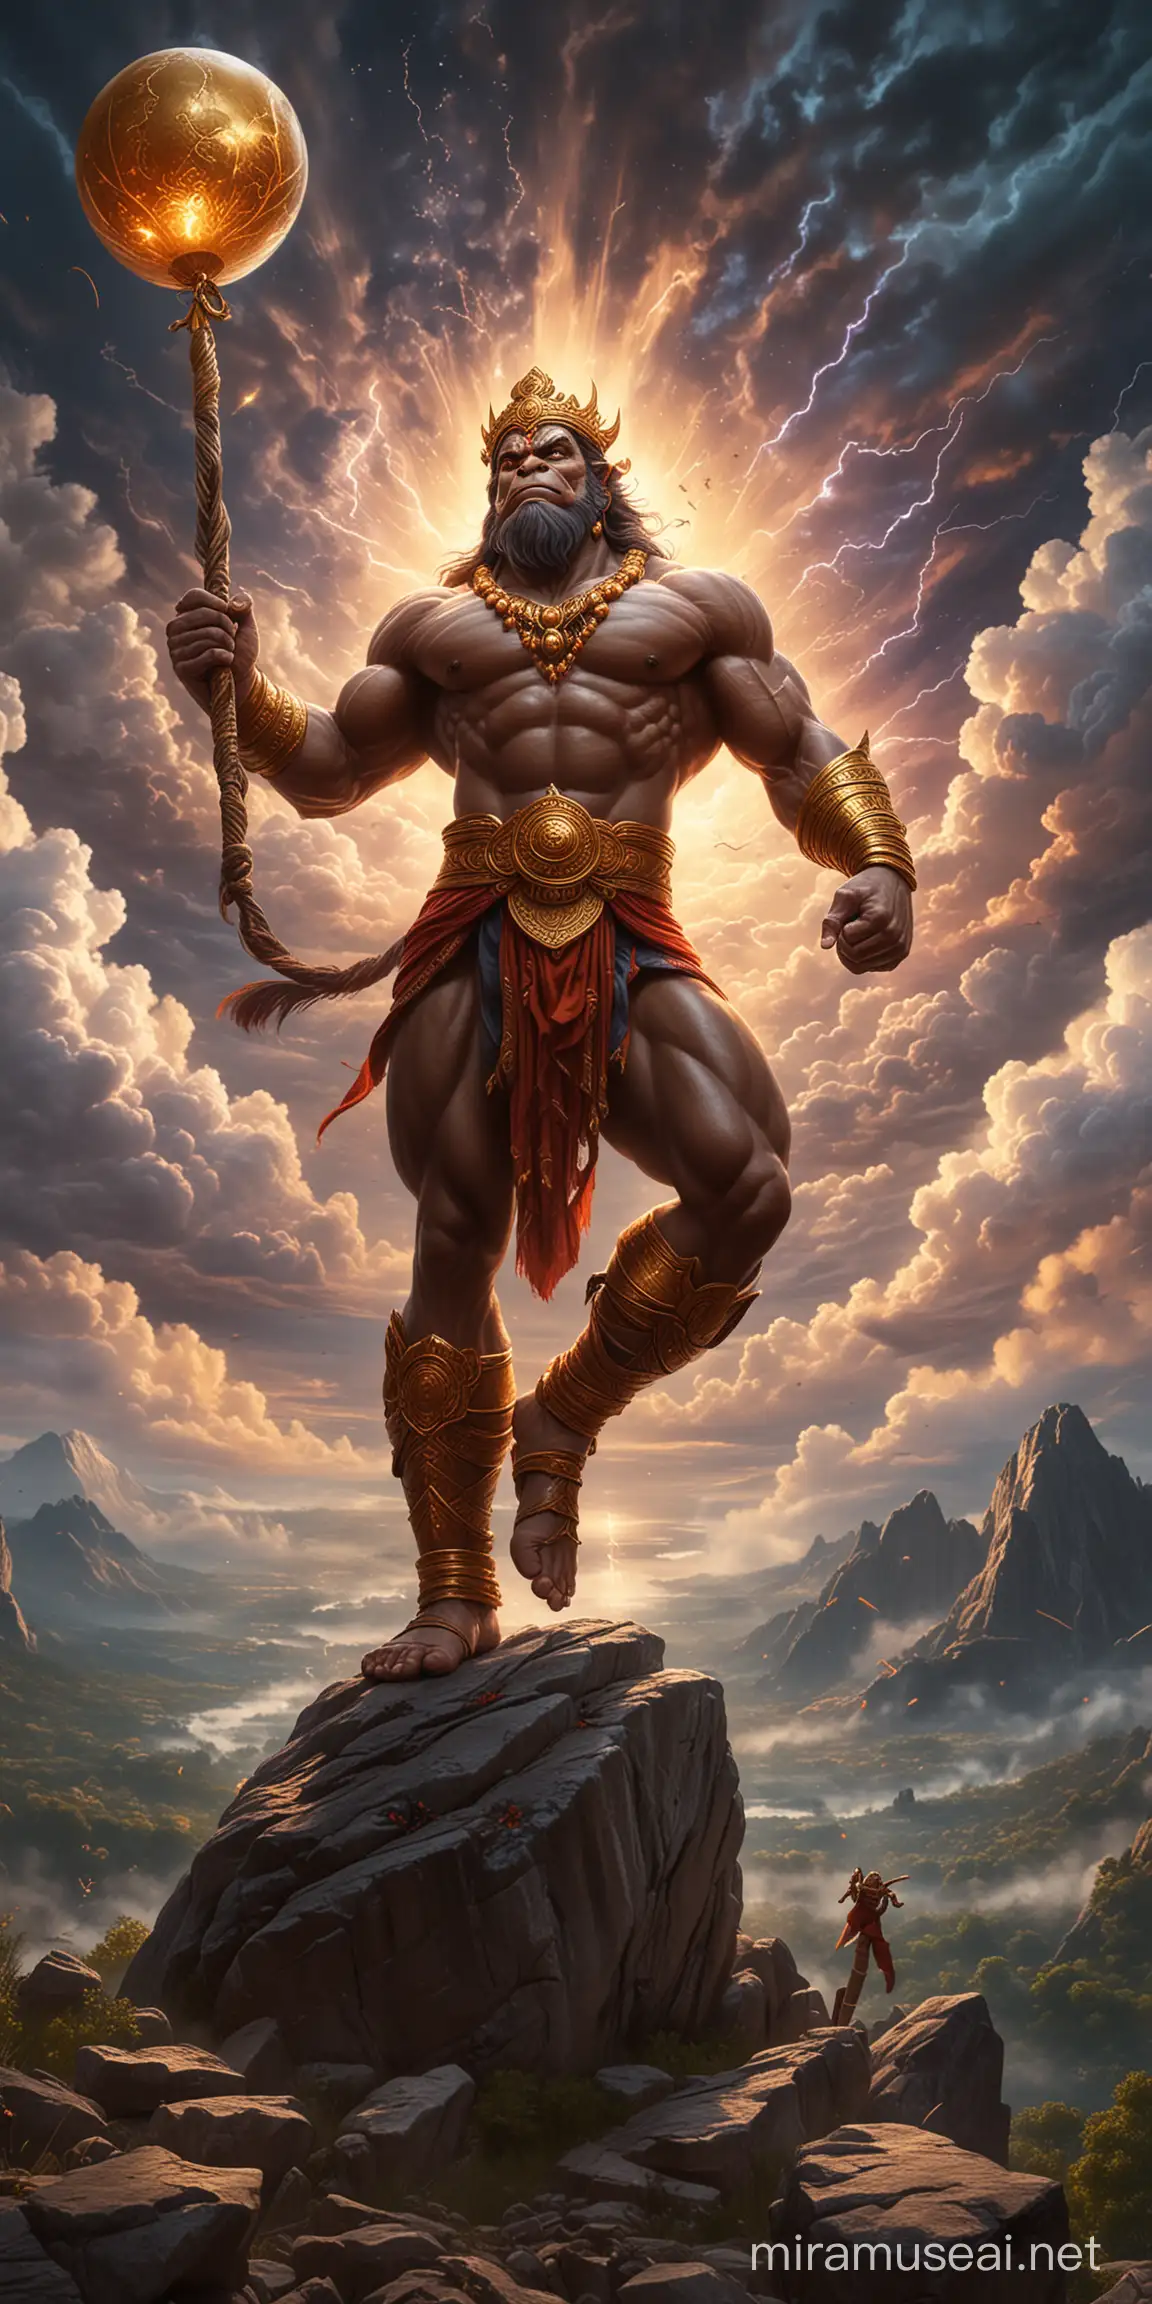 God Hanuman very muscular, holding a Golden hammer with balloon head in right hand pointing to the sky, wearing golden crown, standing on a hill top, one leg stepping on a big rock, battle field in the background, detailed and intricate environment, dynamic pose, muscles defined with chiseled aesthetics, vivid, ultra realistic.

Thunders roar and lightning dances in the sky, painting it with wild, vibrant colors. Each bolt of electricity illuminates the darkness, revealing the intricate patterns of clouds swirling like celestial brushstrokes. The rumble of thunder echoes through the air, shaking the earth beneath with its power. Nature's own fireworks display, a spectacle sky.